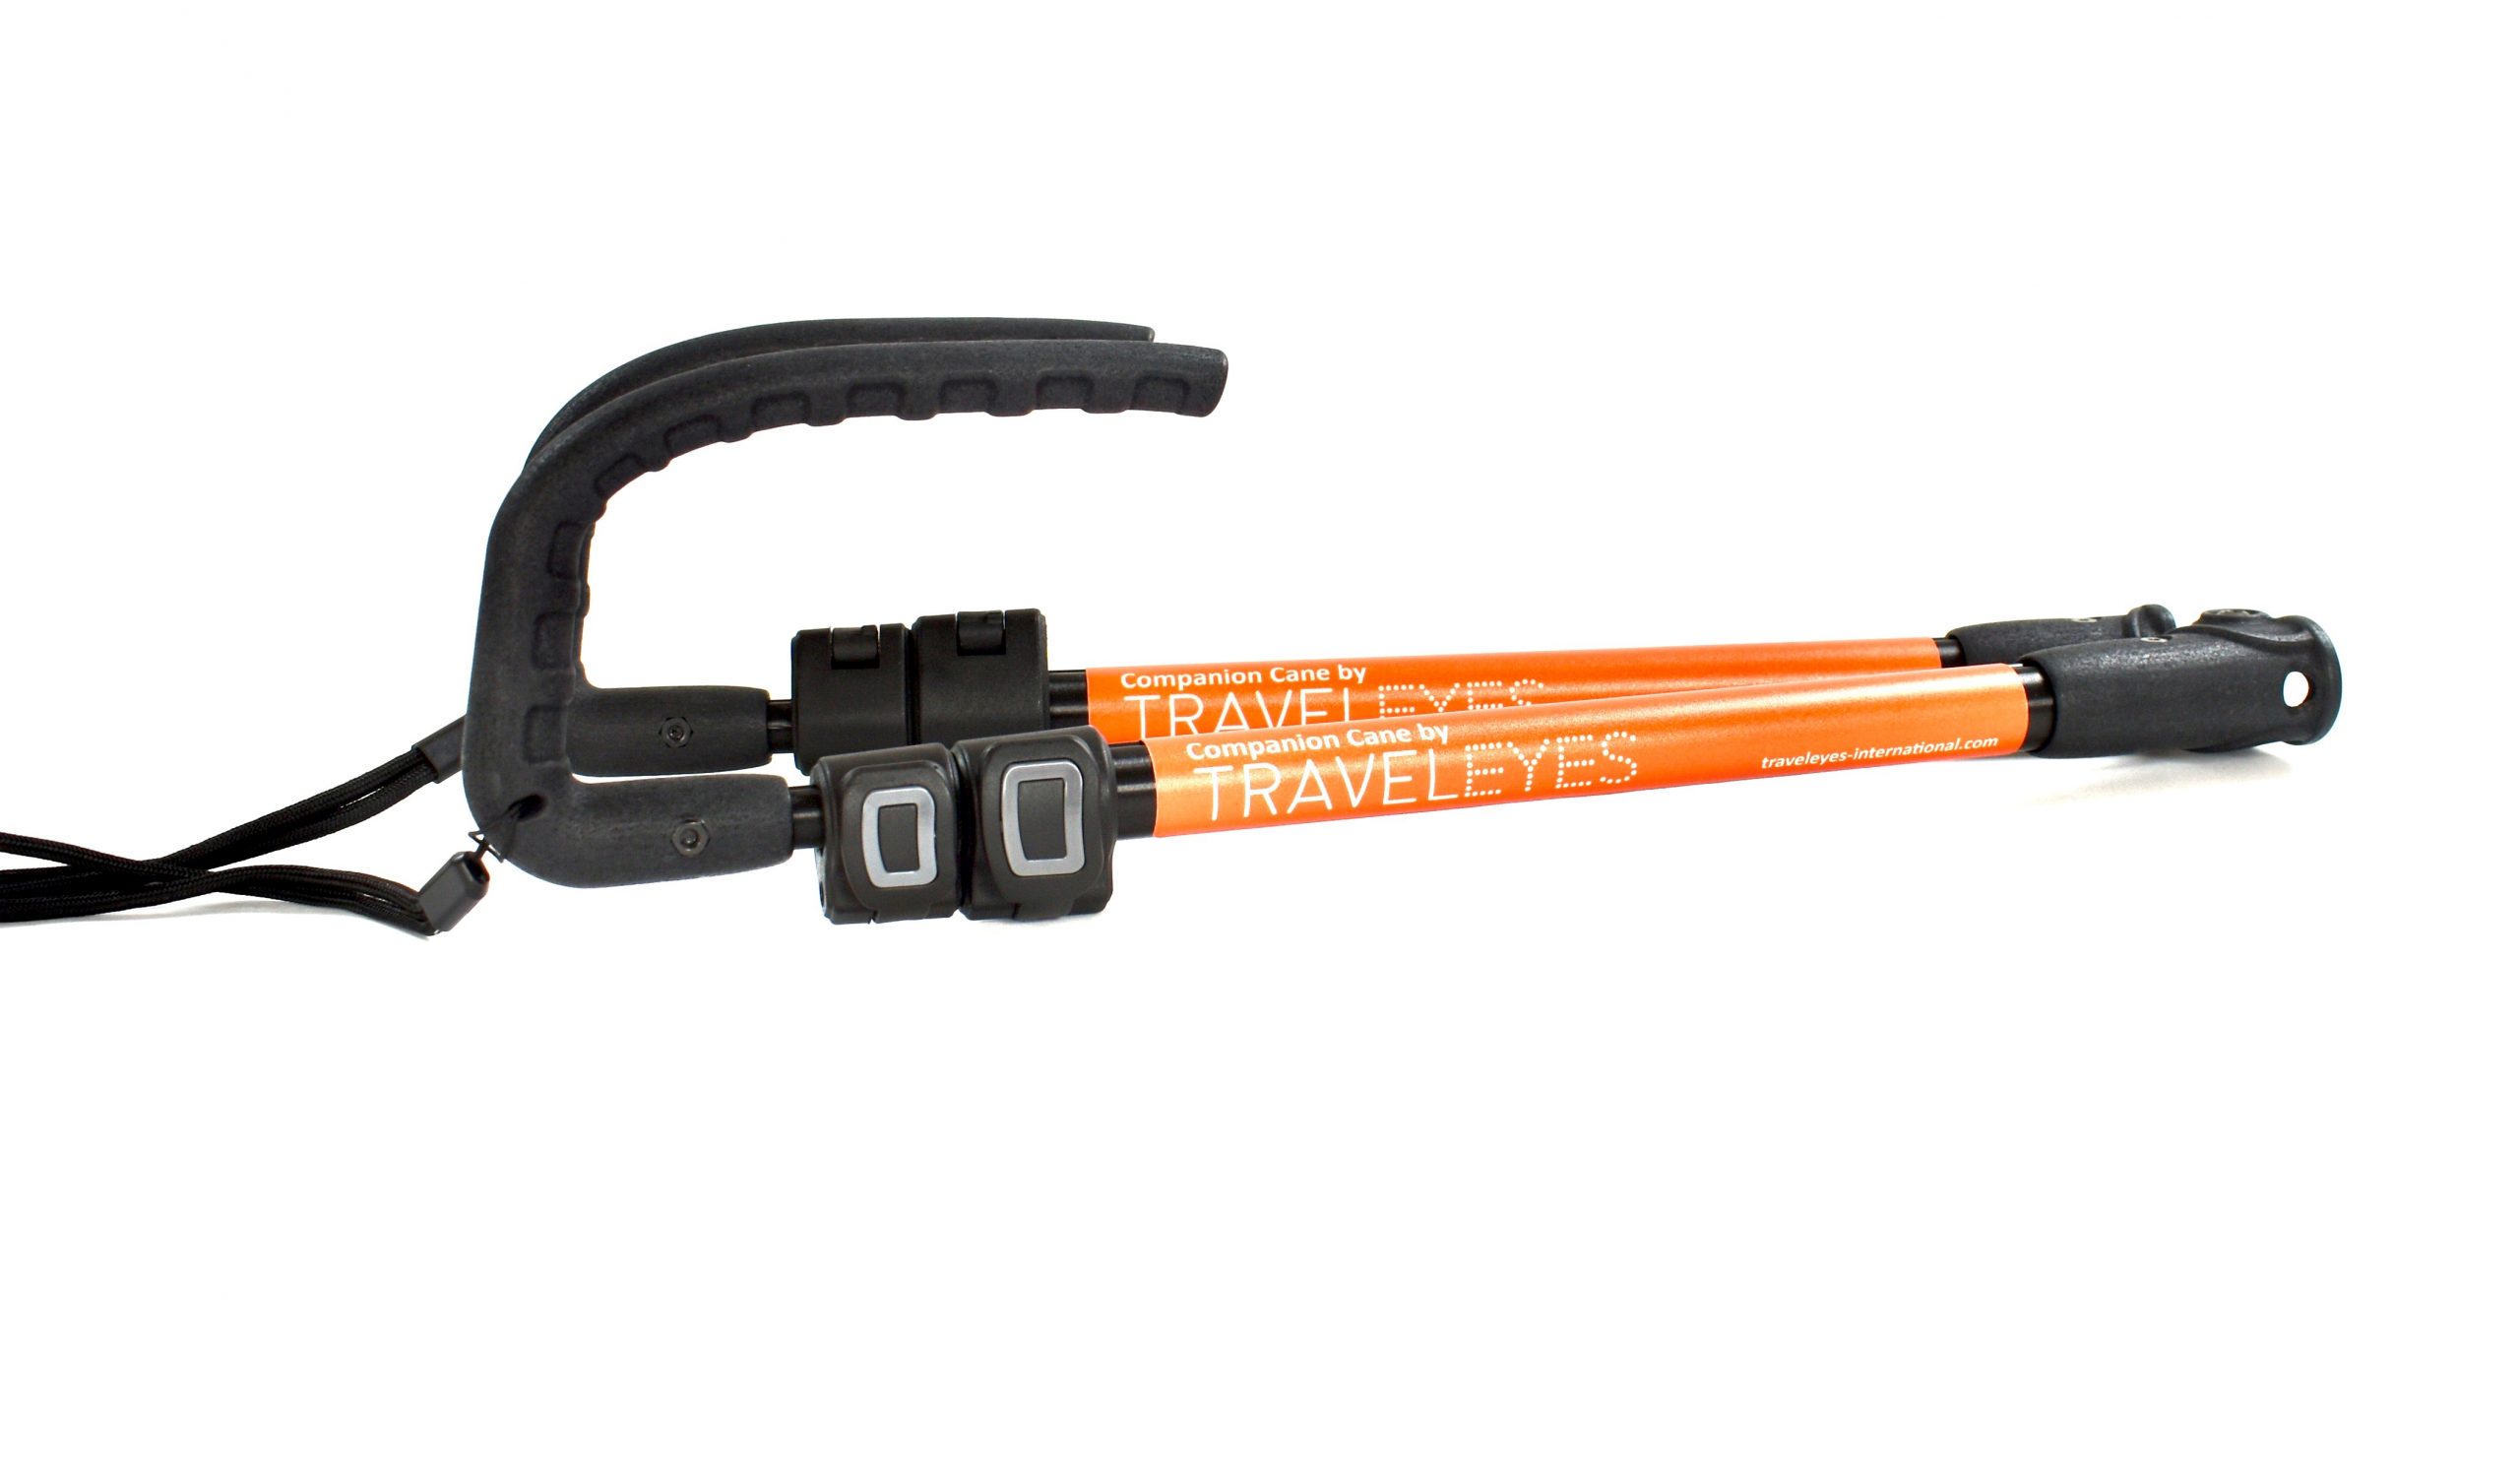 Photo description: A close up of the Companion Cane folded to its smallest size. The handles are black with wrist straps and the Traveleyes Logo in orange is along the poles of the cane